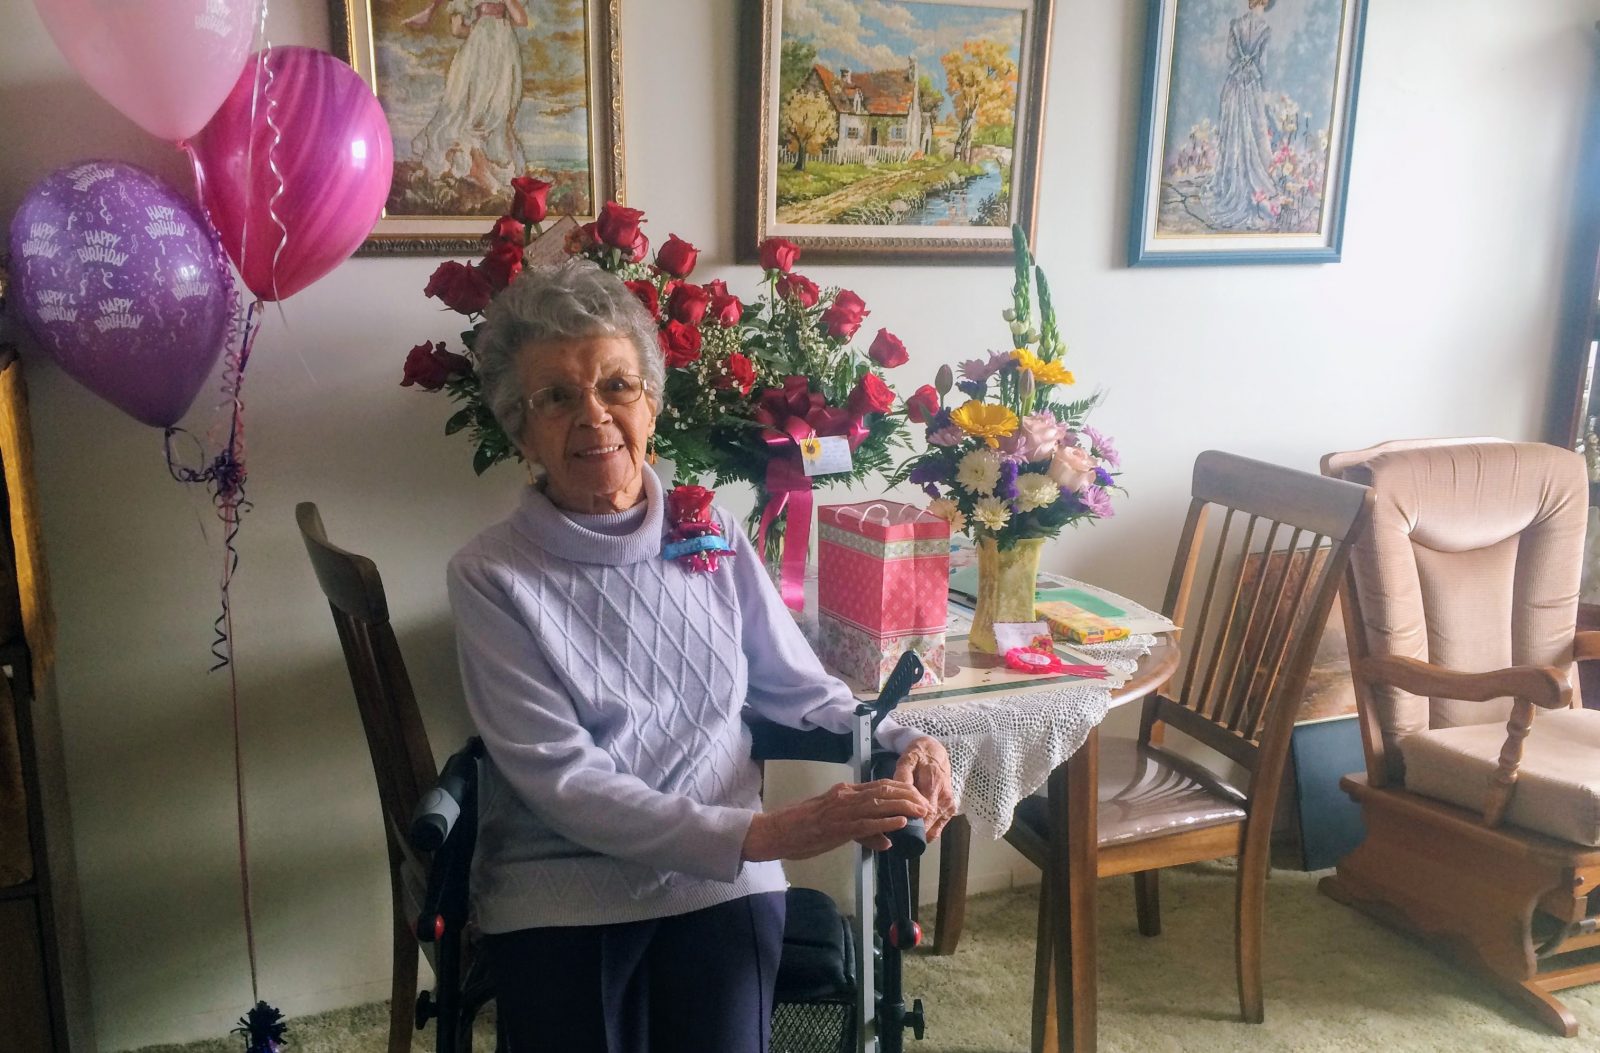 Local centenarian celebrates 100 years in style